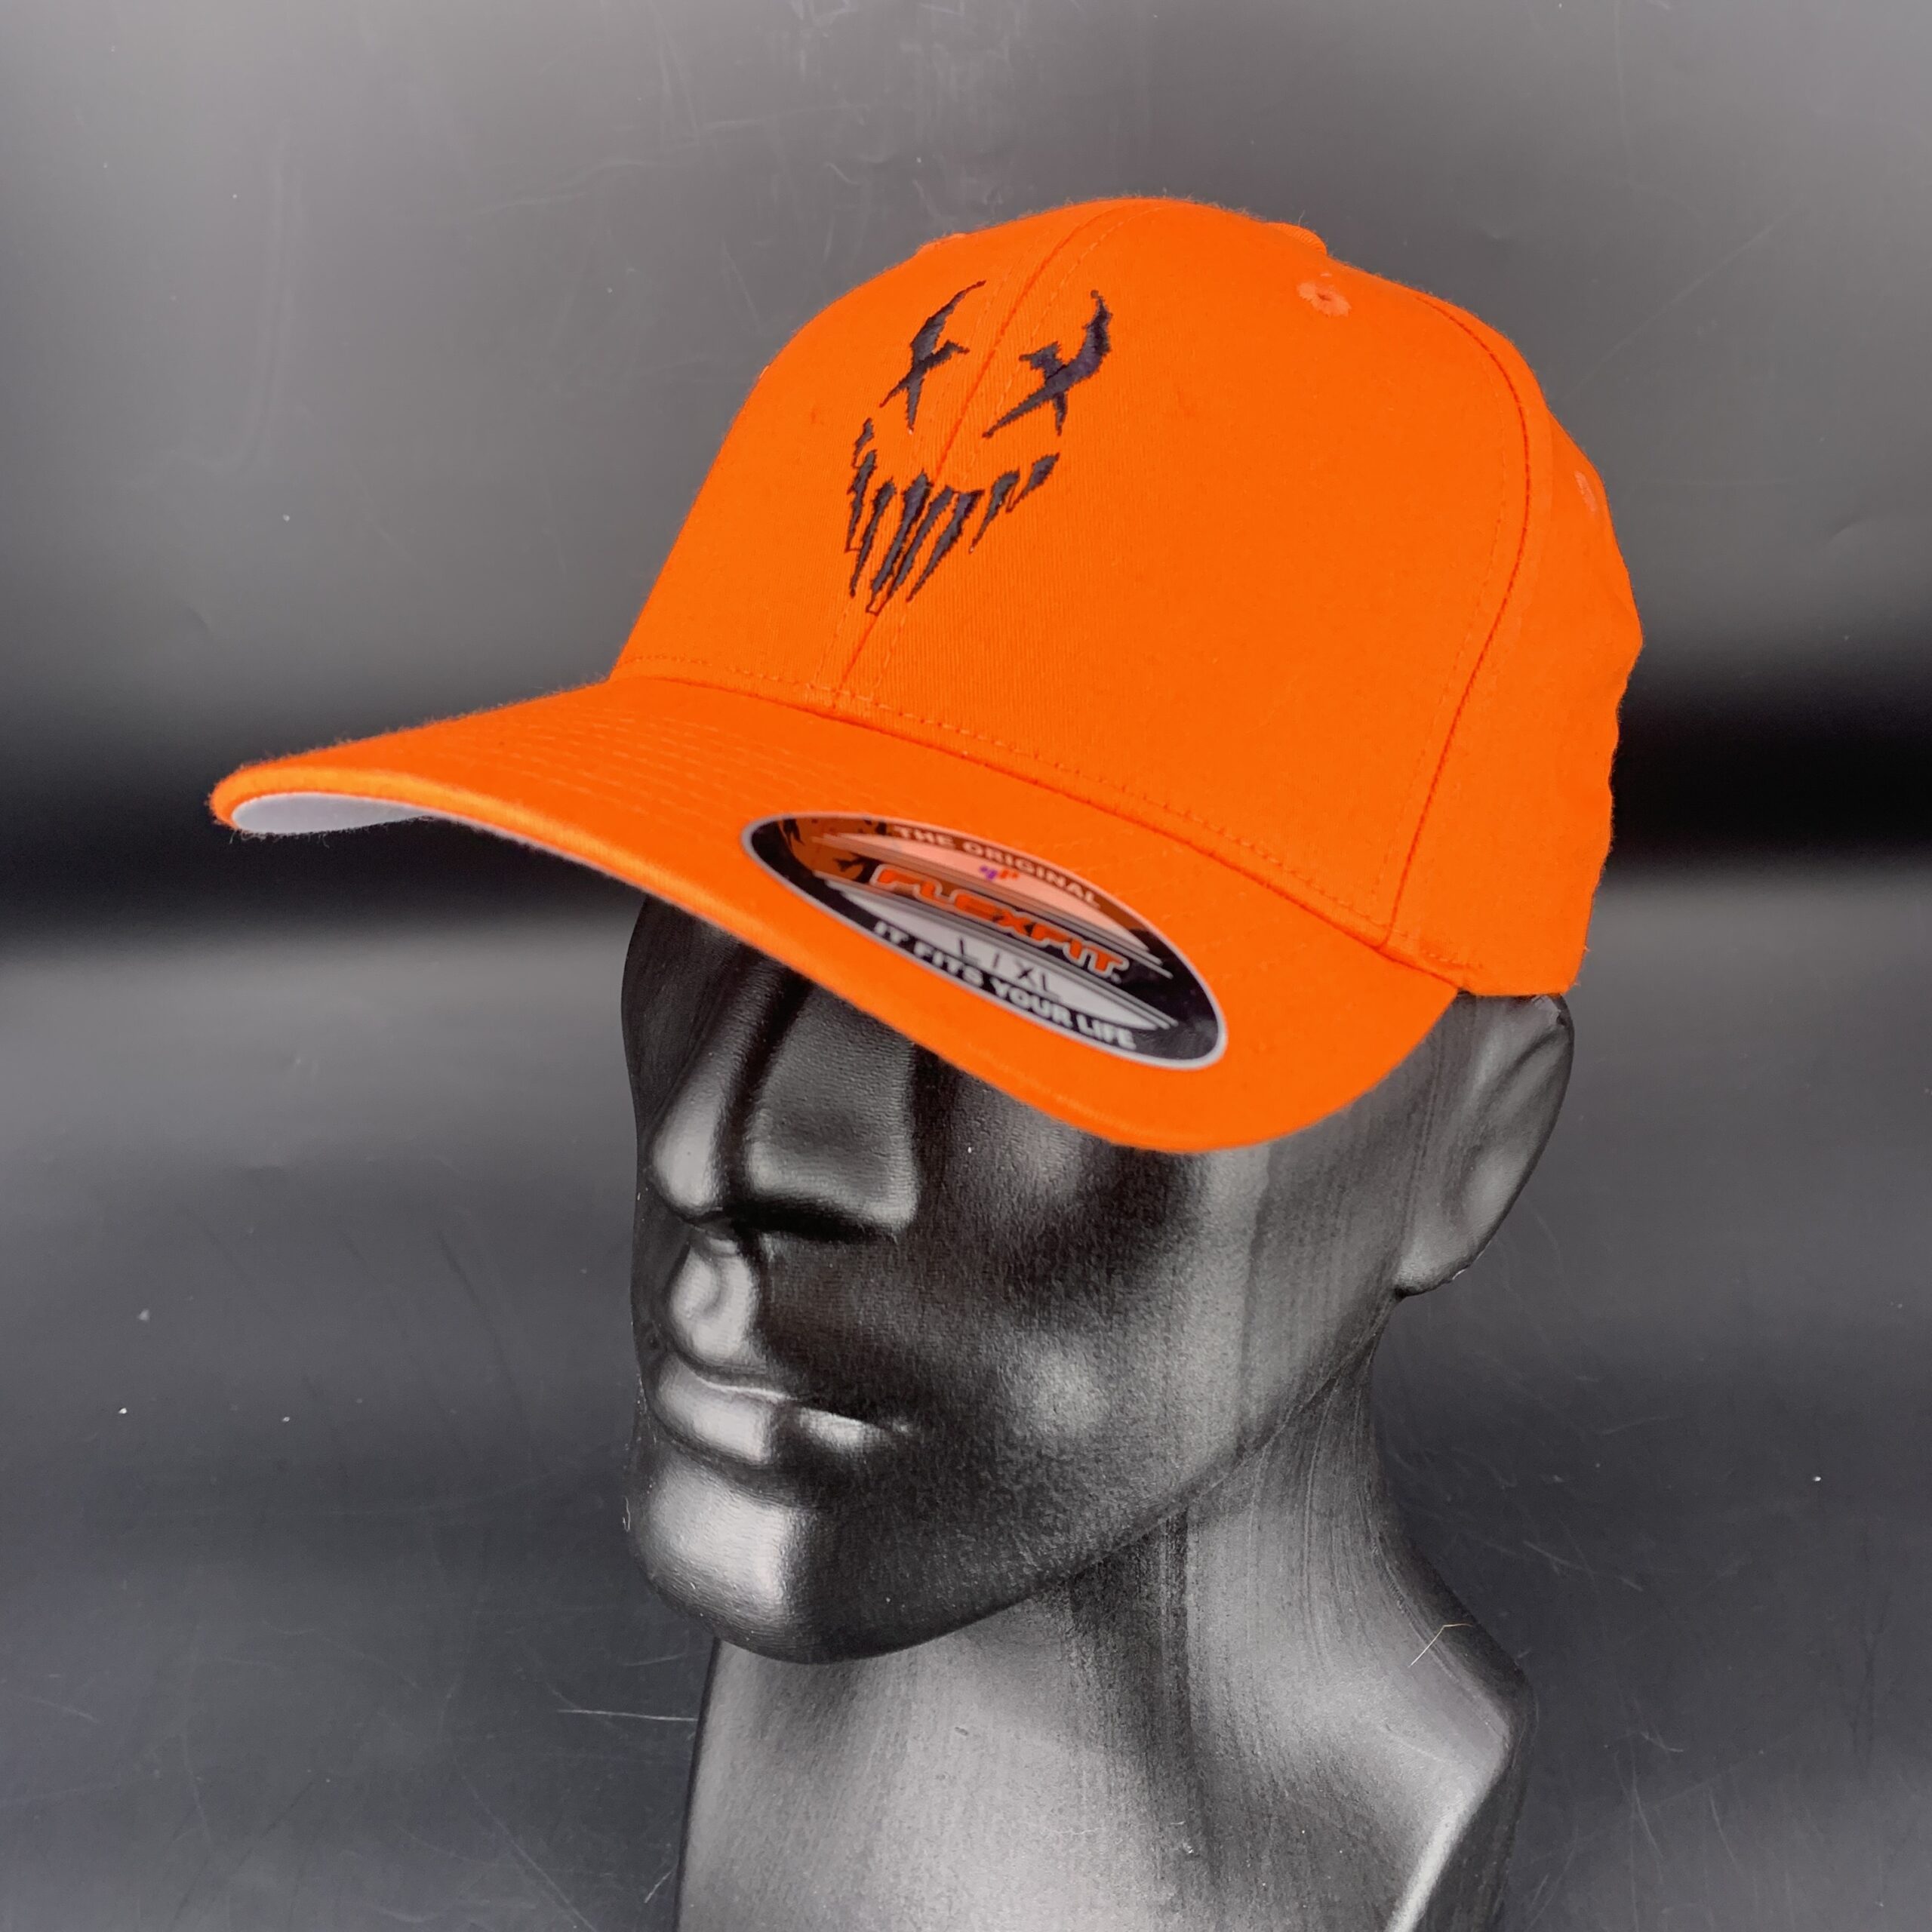 Flexfit twill hat with Official Blaze X-face- embroidered Merchandise Orange/Black Mushroomhead 